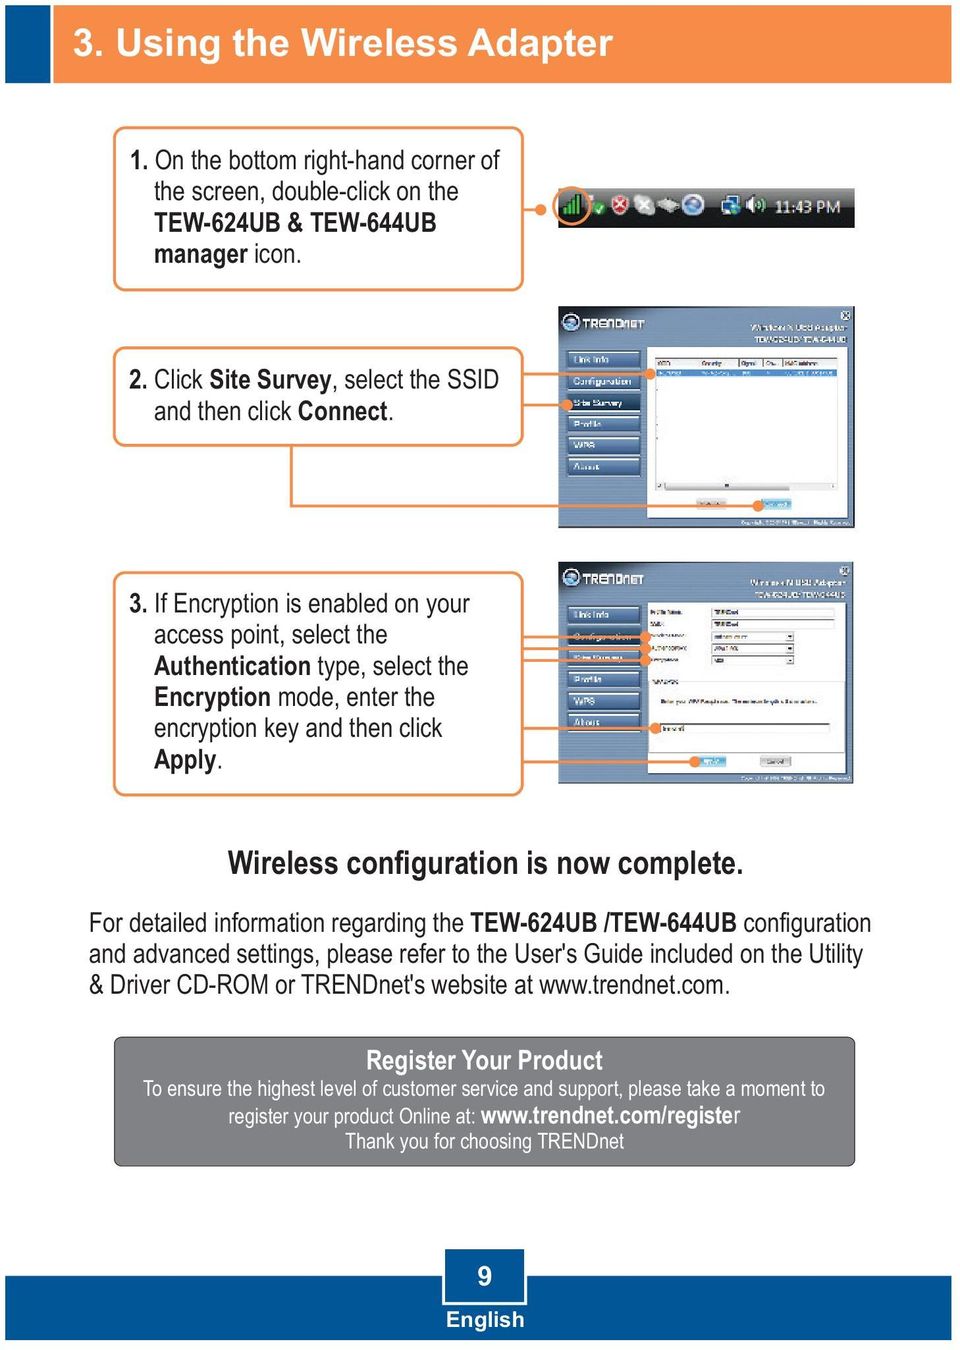 For detailed information regarding the TEW-624UB /TEW-644UB configuration and advanced settings, please refer to the User's Guide included on the Utility & Driver CD-ROM or TRENDnet's website at www.